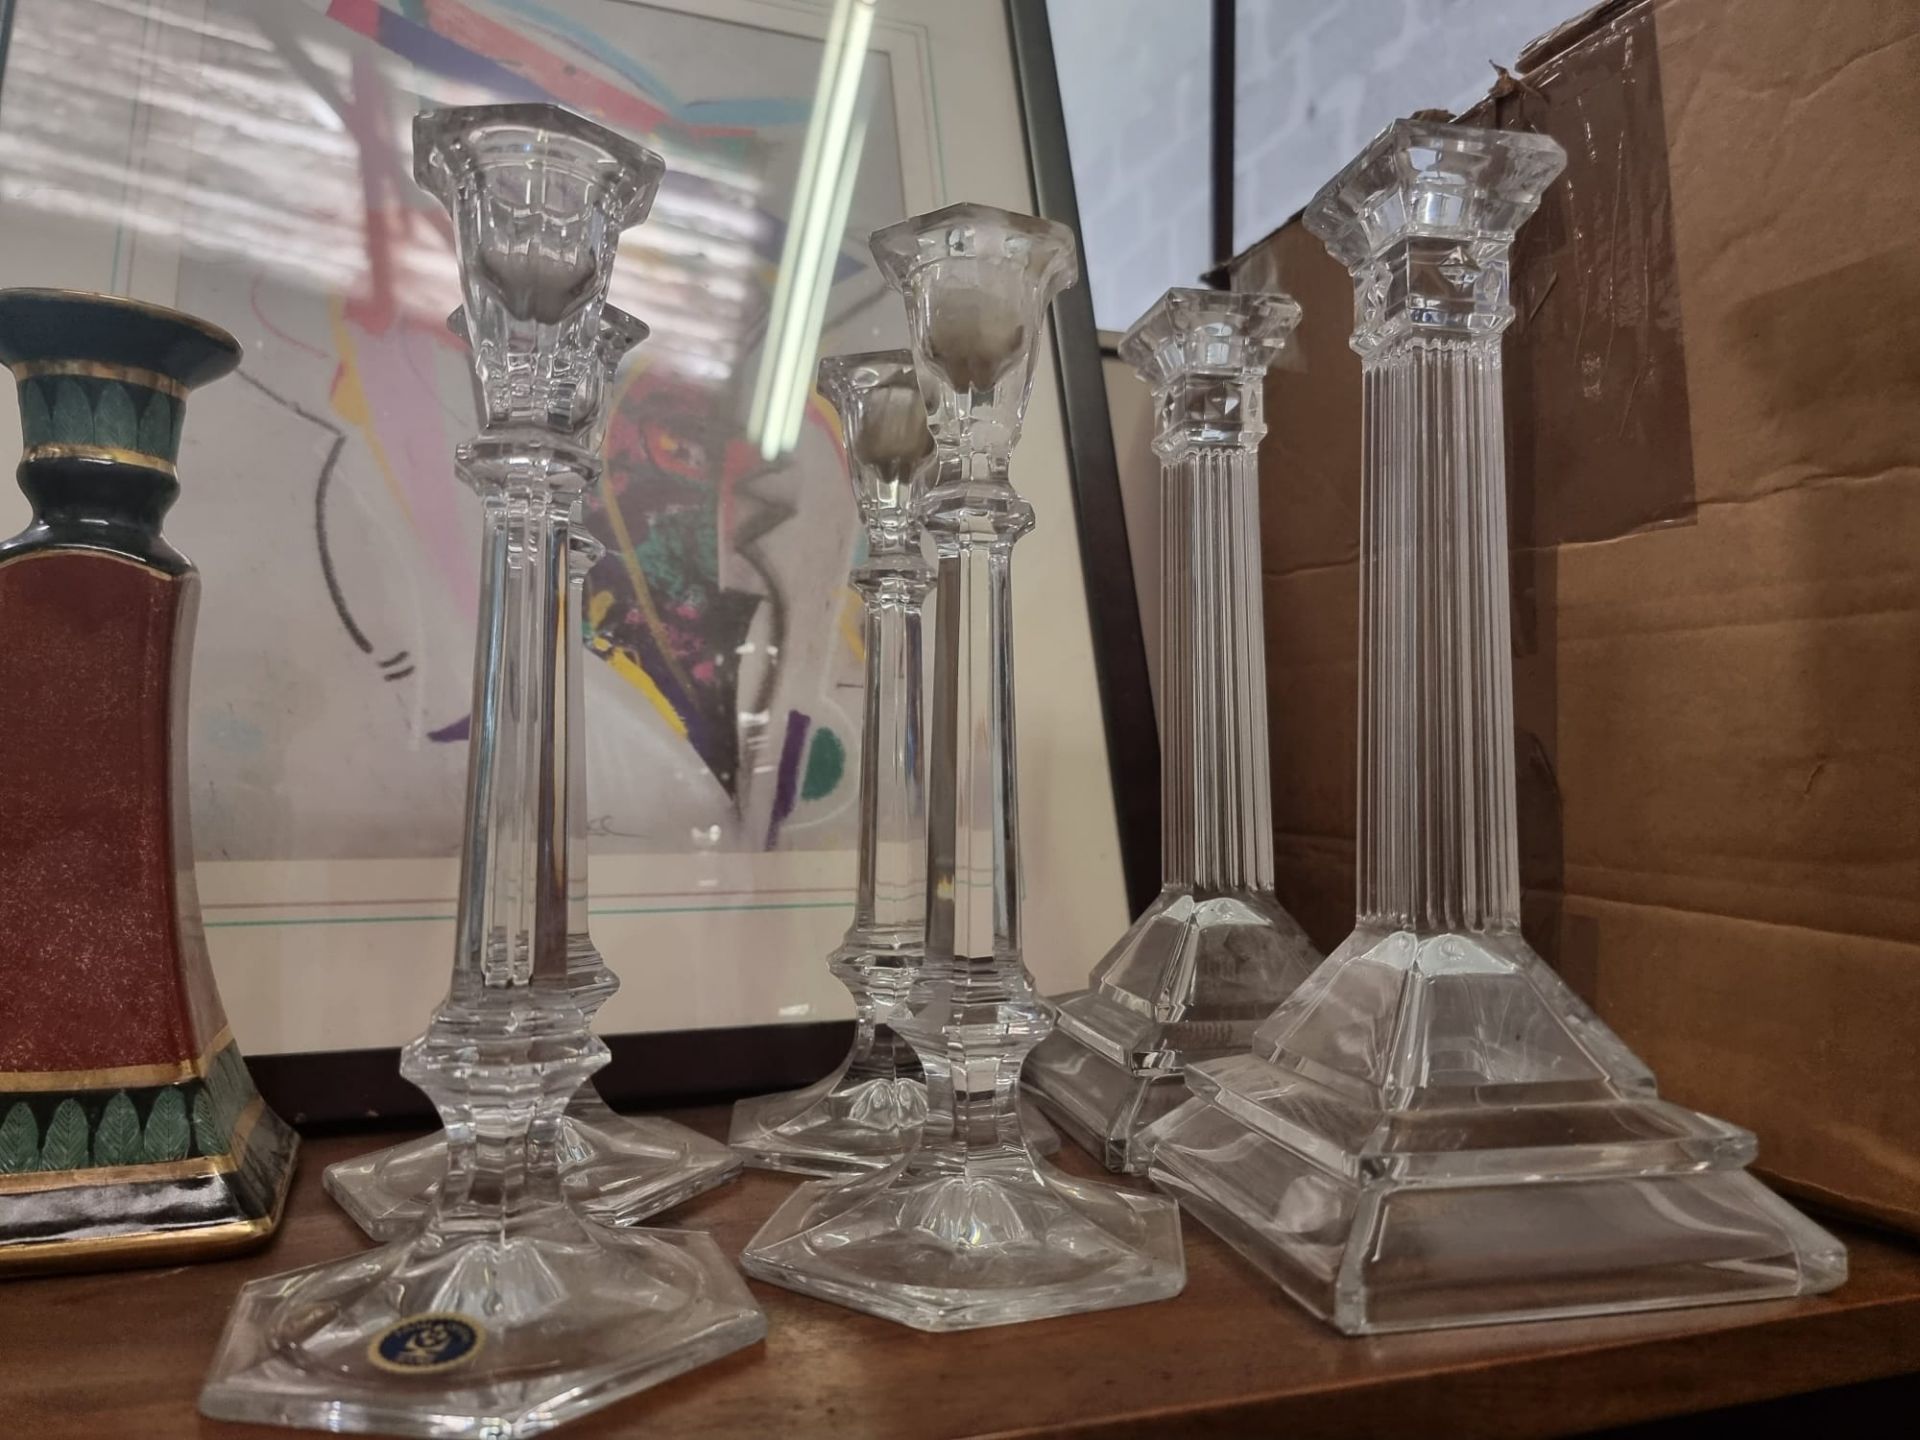 A set of 6 x Poltar Crystal 24% Pbo candlesticks 4 are 9” round base and 2 are 10”  square elegant